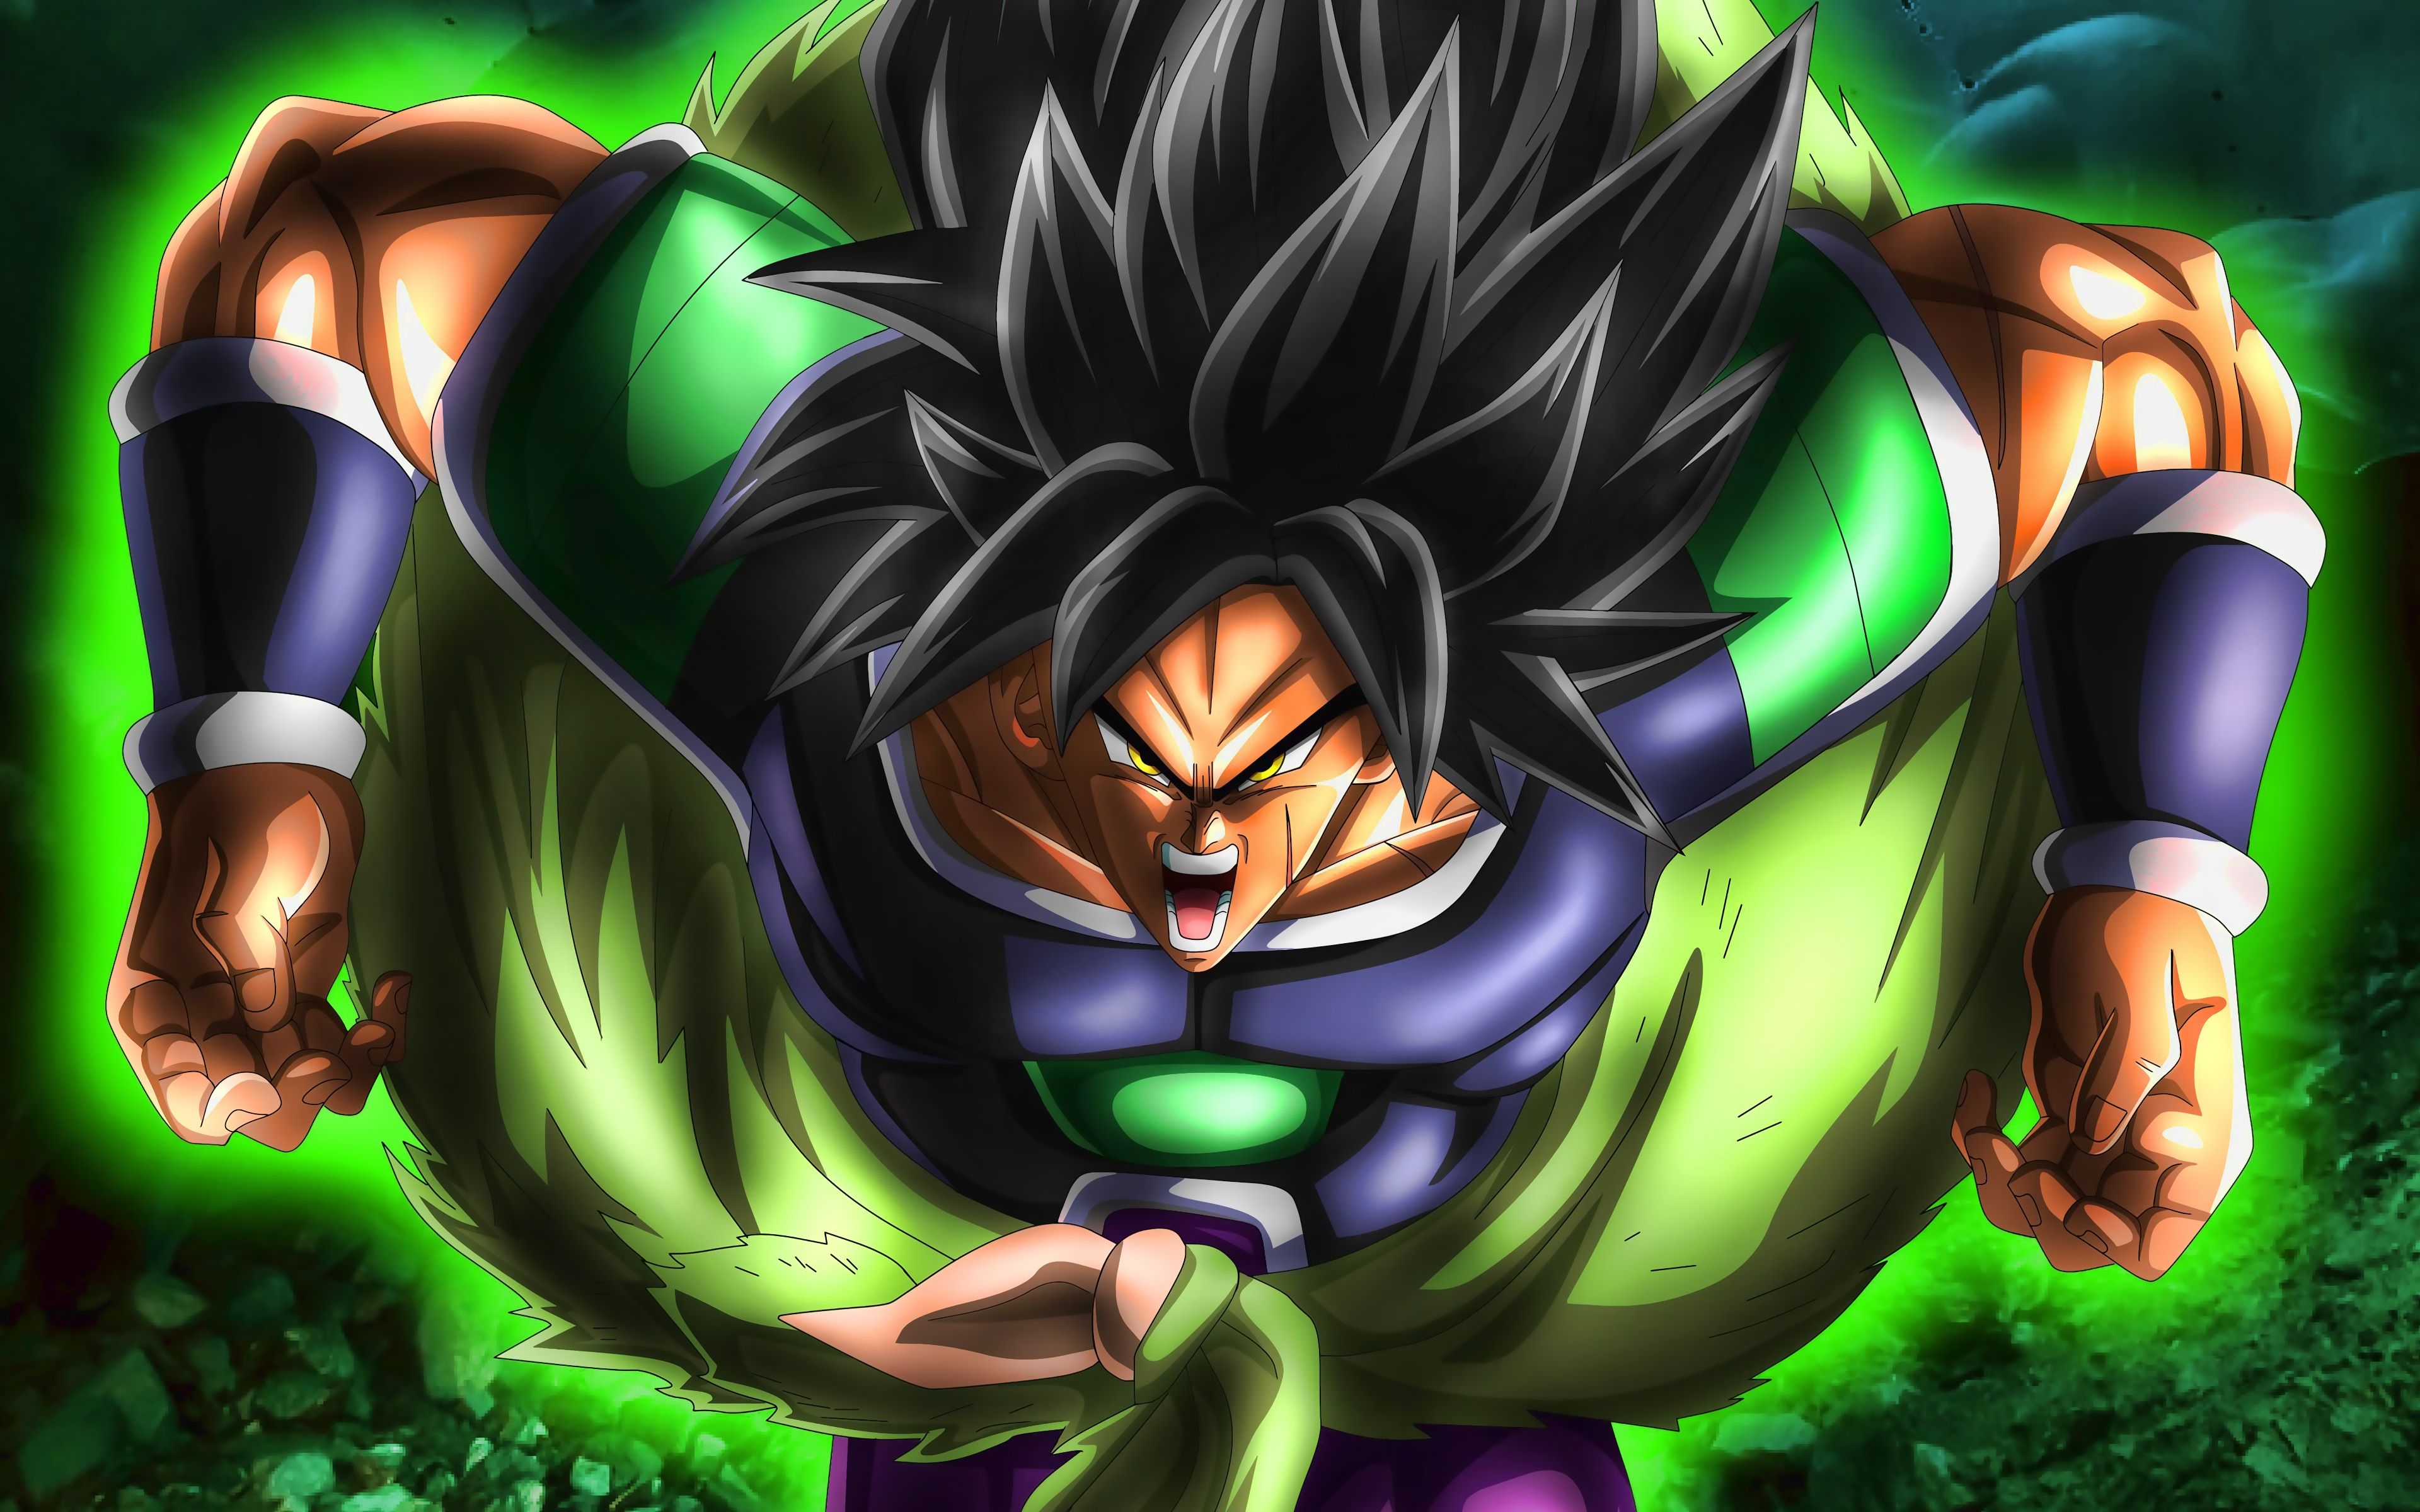 Download wallpaper Broly, 4k, green fire, Dragon Ball, artwork, DBS, Dragon Ball Super, DBS characters, Broly 4k for desktop with resolution 3840x2400. High Quality HD picture wallpaper